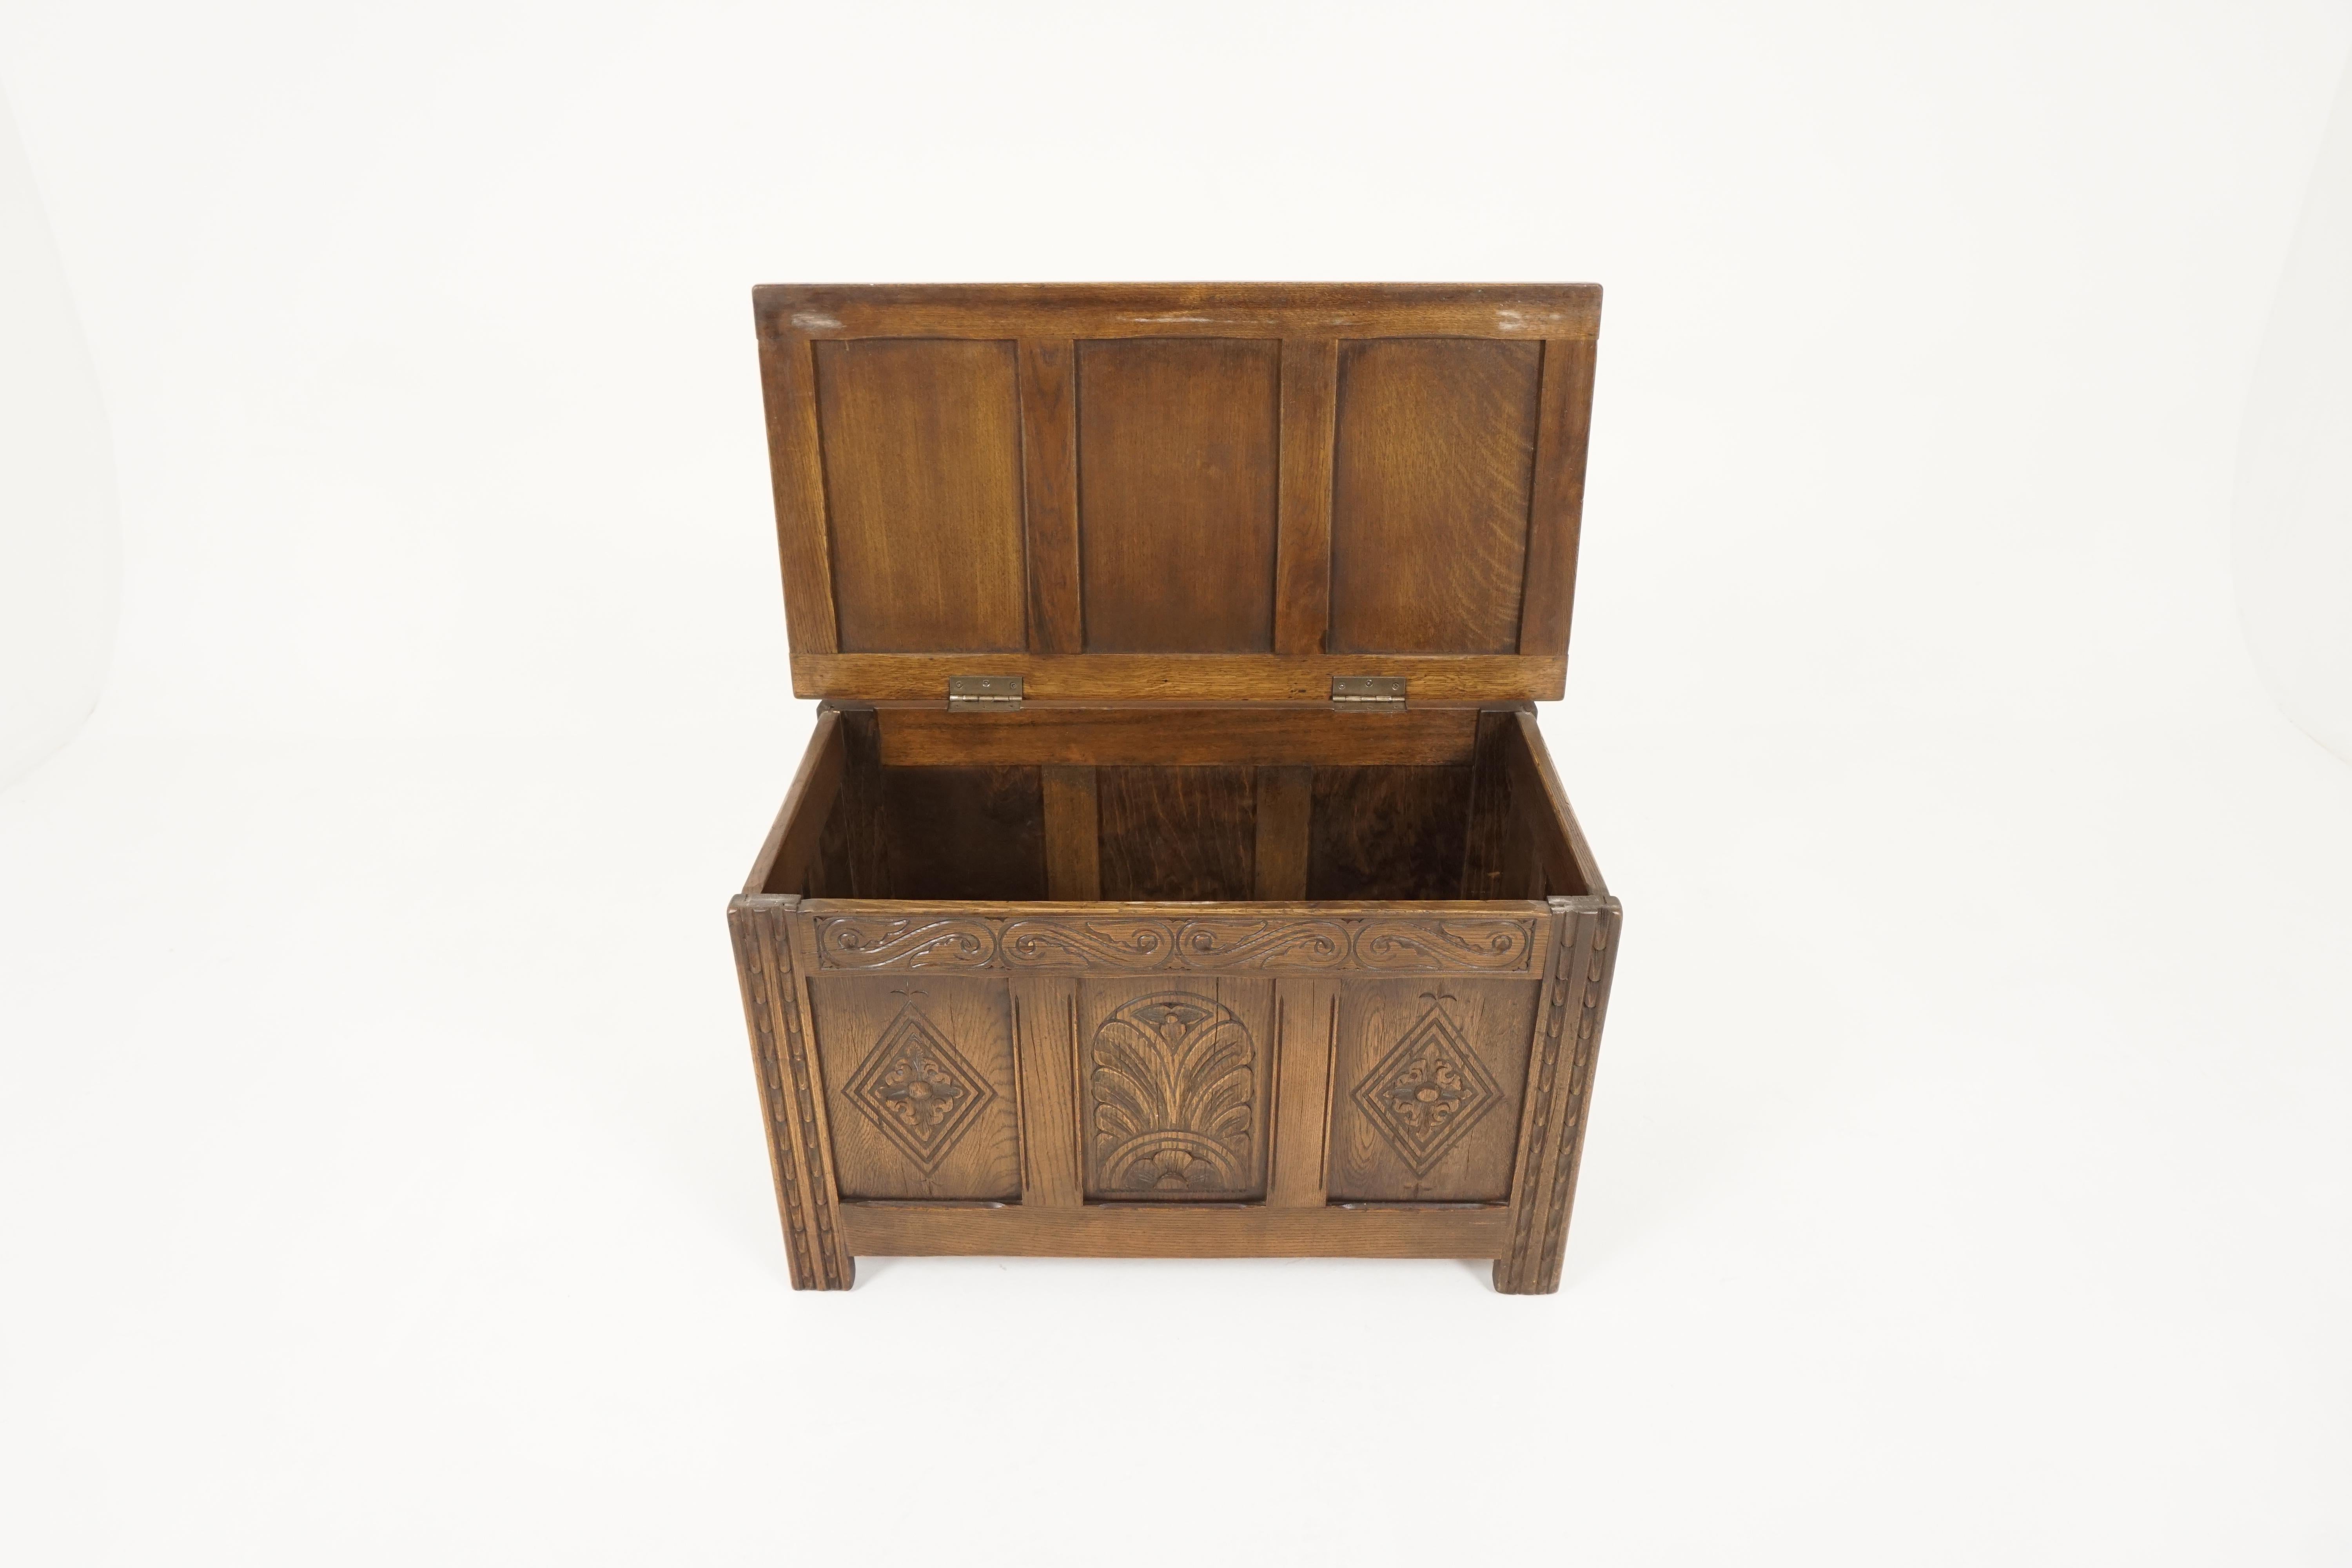 Hand-Crafted Vintage Carved Oak Box, Blanket Box, Toy Box, Coffee Table, Scotland 1940, B2312